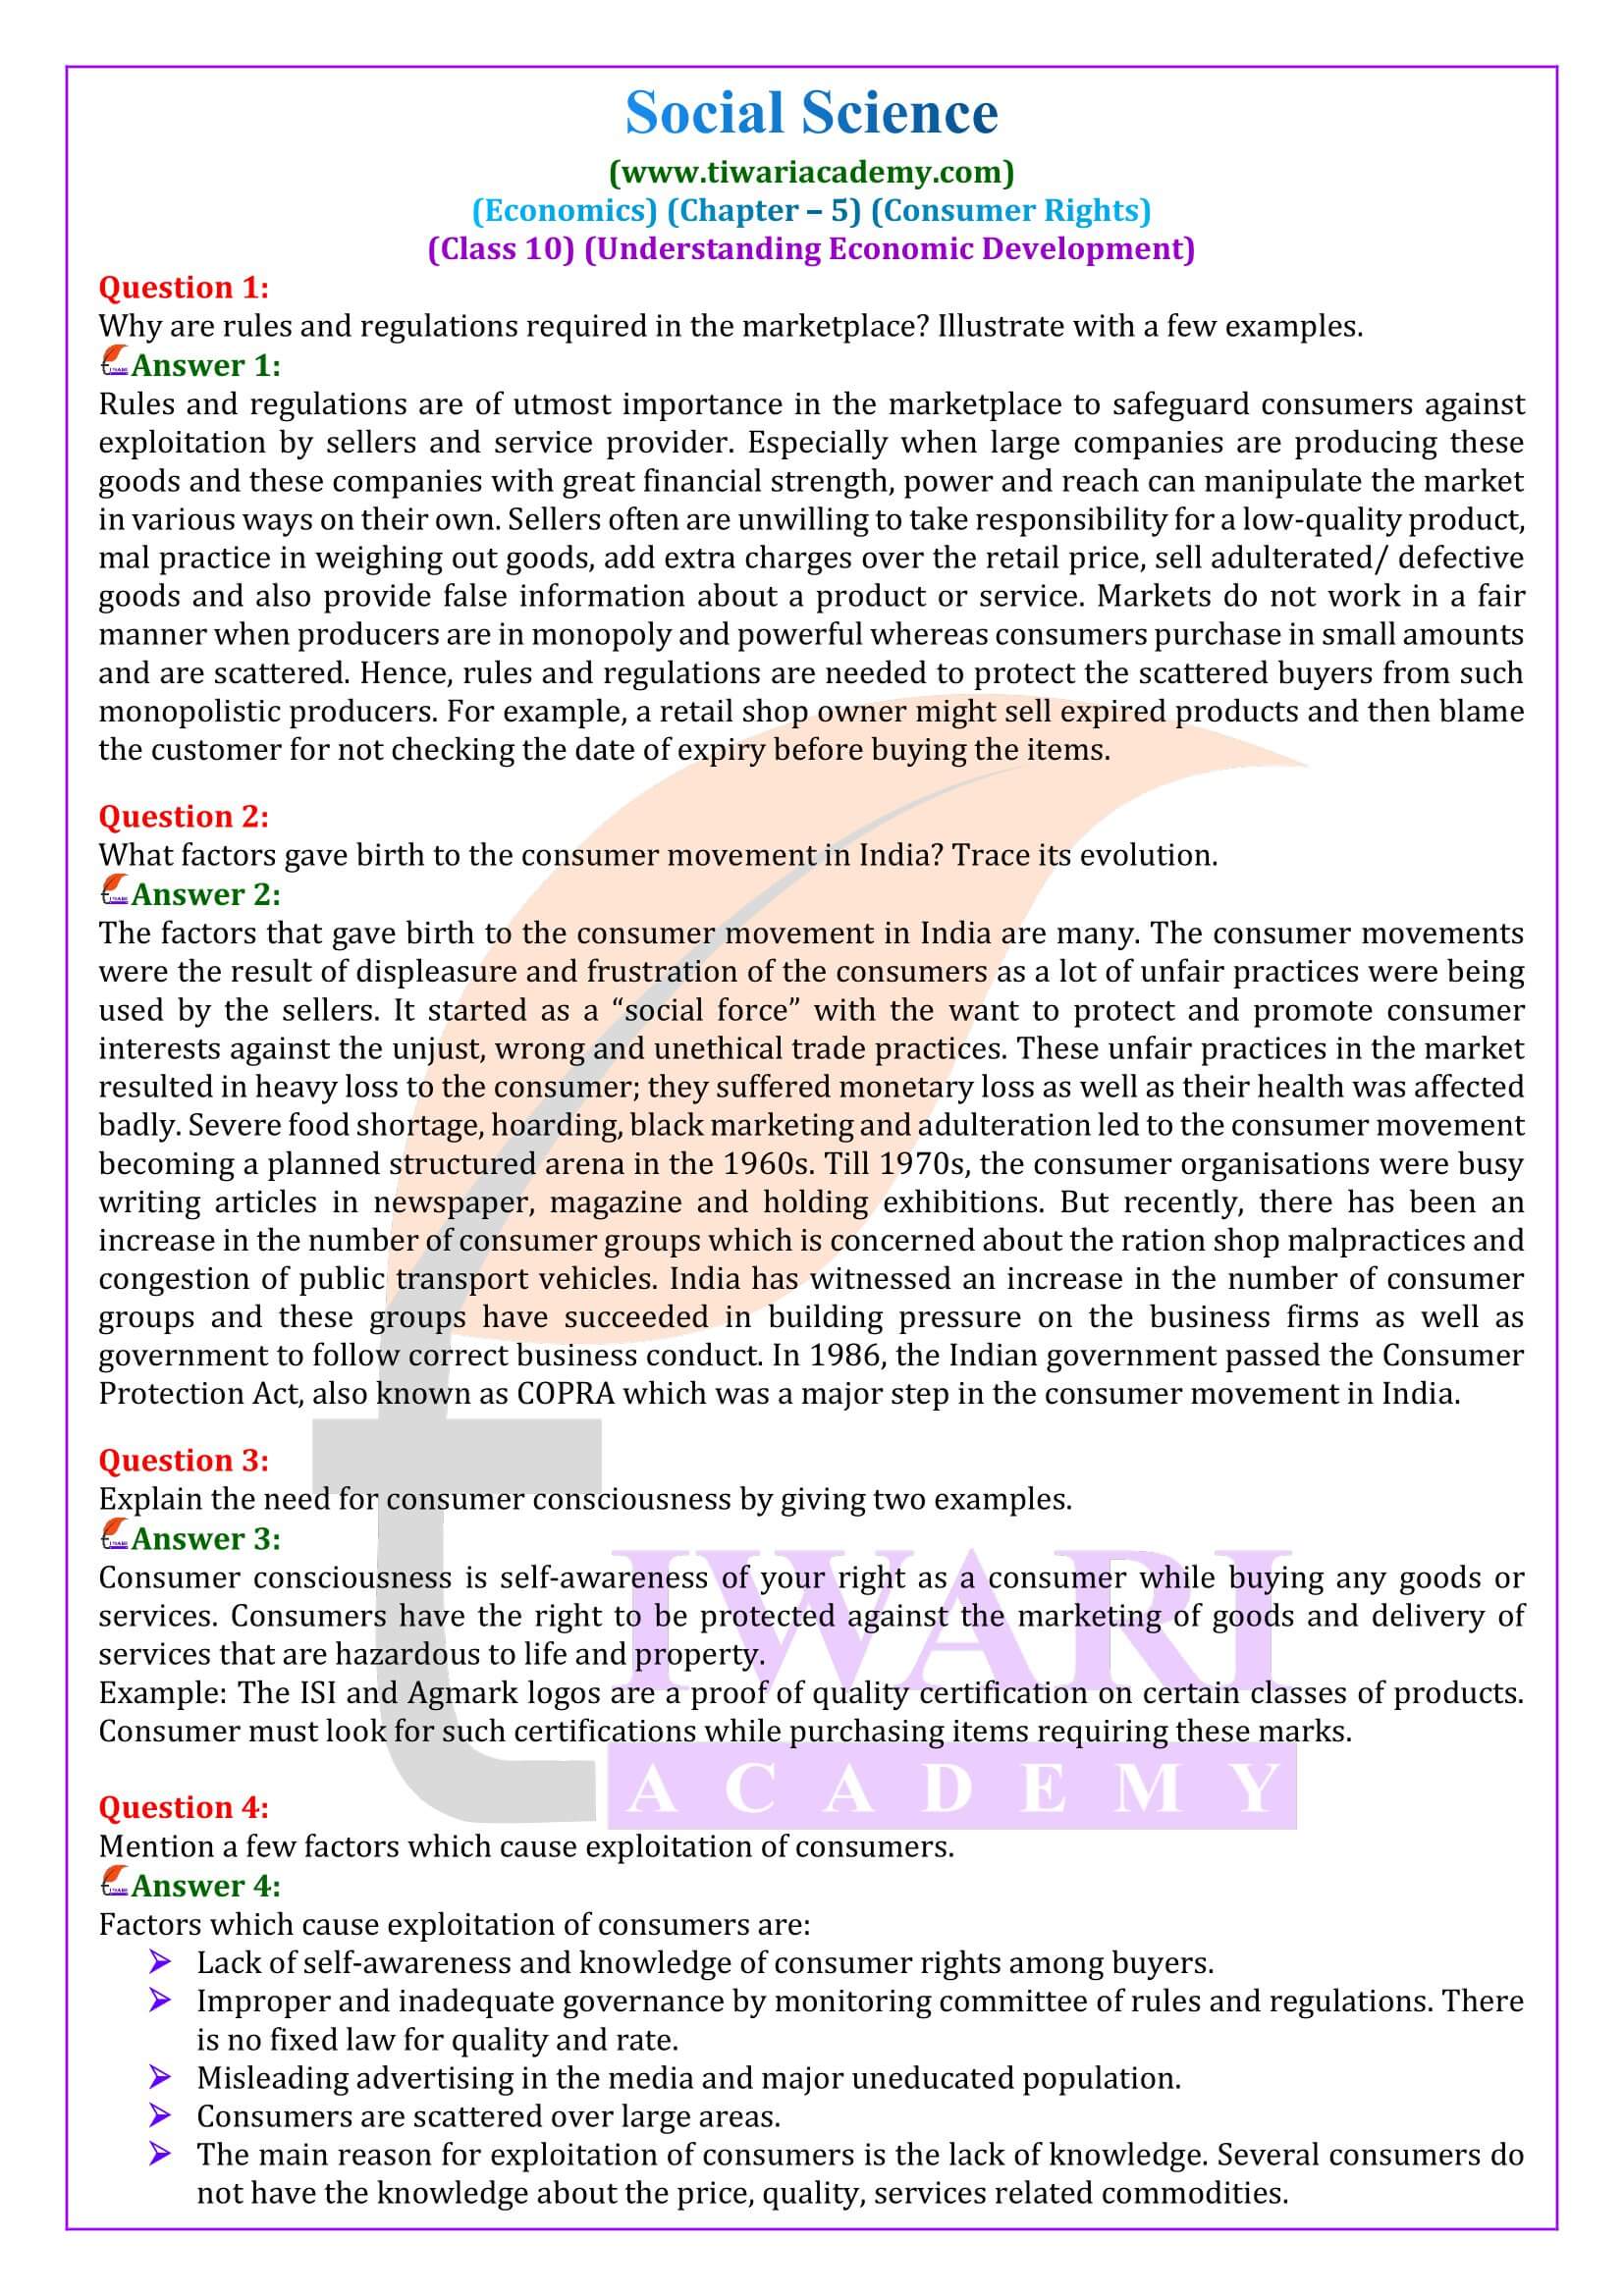 Class 10 Economics Chapter 5 Consumer Rights